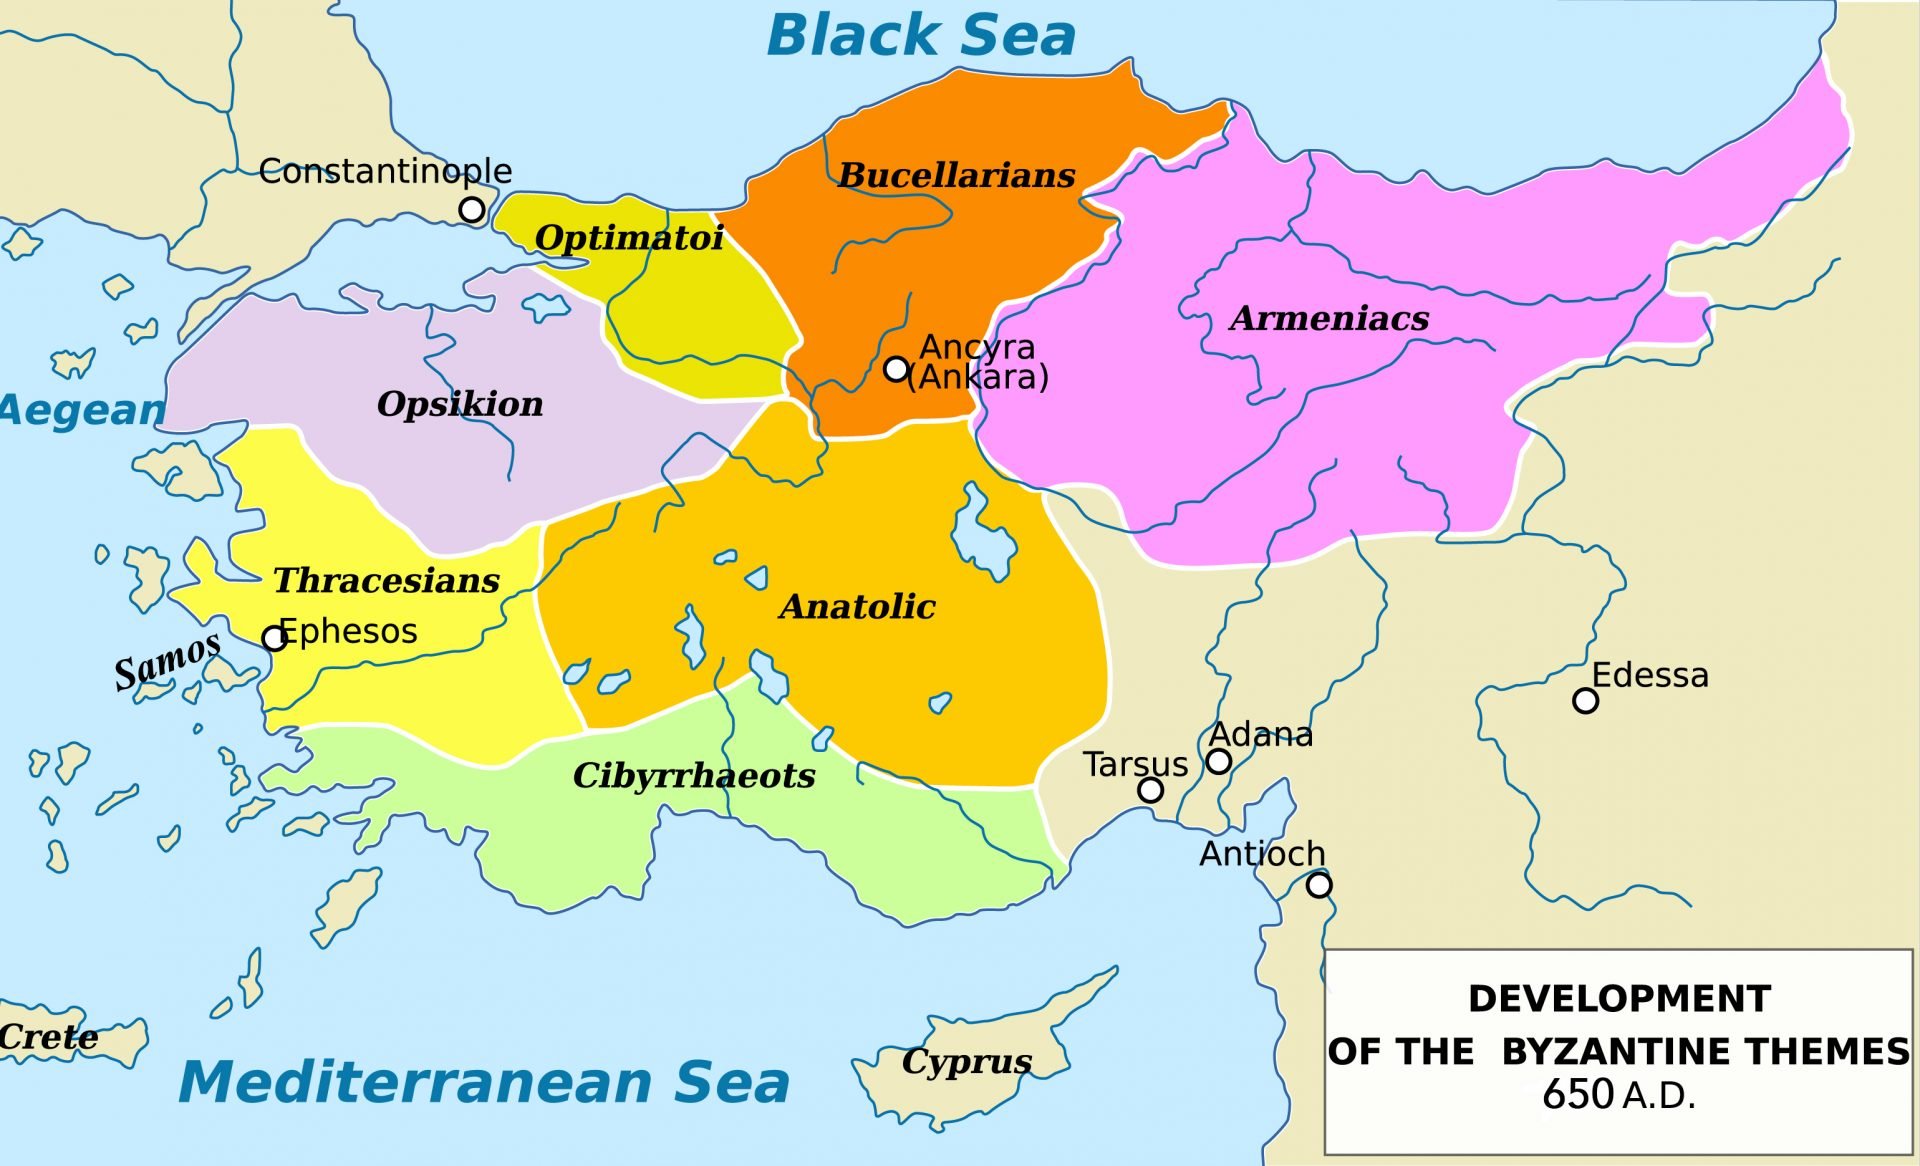 Colorful map showcasing the development of the Byzantine themes (administrative divisions) in 650 A.D. The regions are demarcated with various hues and labeled with names such as 'Opsikion,' 'Optimatoi,' 'Bucellarians,' 'Armeniacs,' and 'Anatolic.' Significant cities and geographical features like Constantinople, Ancyra (Ankara), Tarsus, Antioch, Edessa, and the Aegean and Mediterranean Seas are also pinpointed. The map is sourced from the US Military Academy History archives.